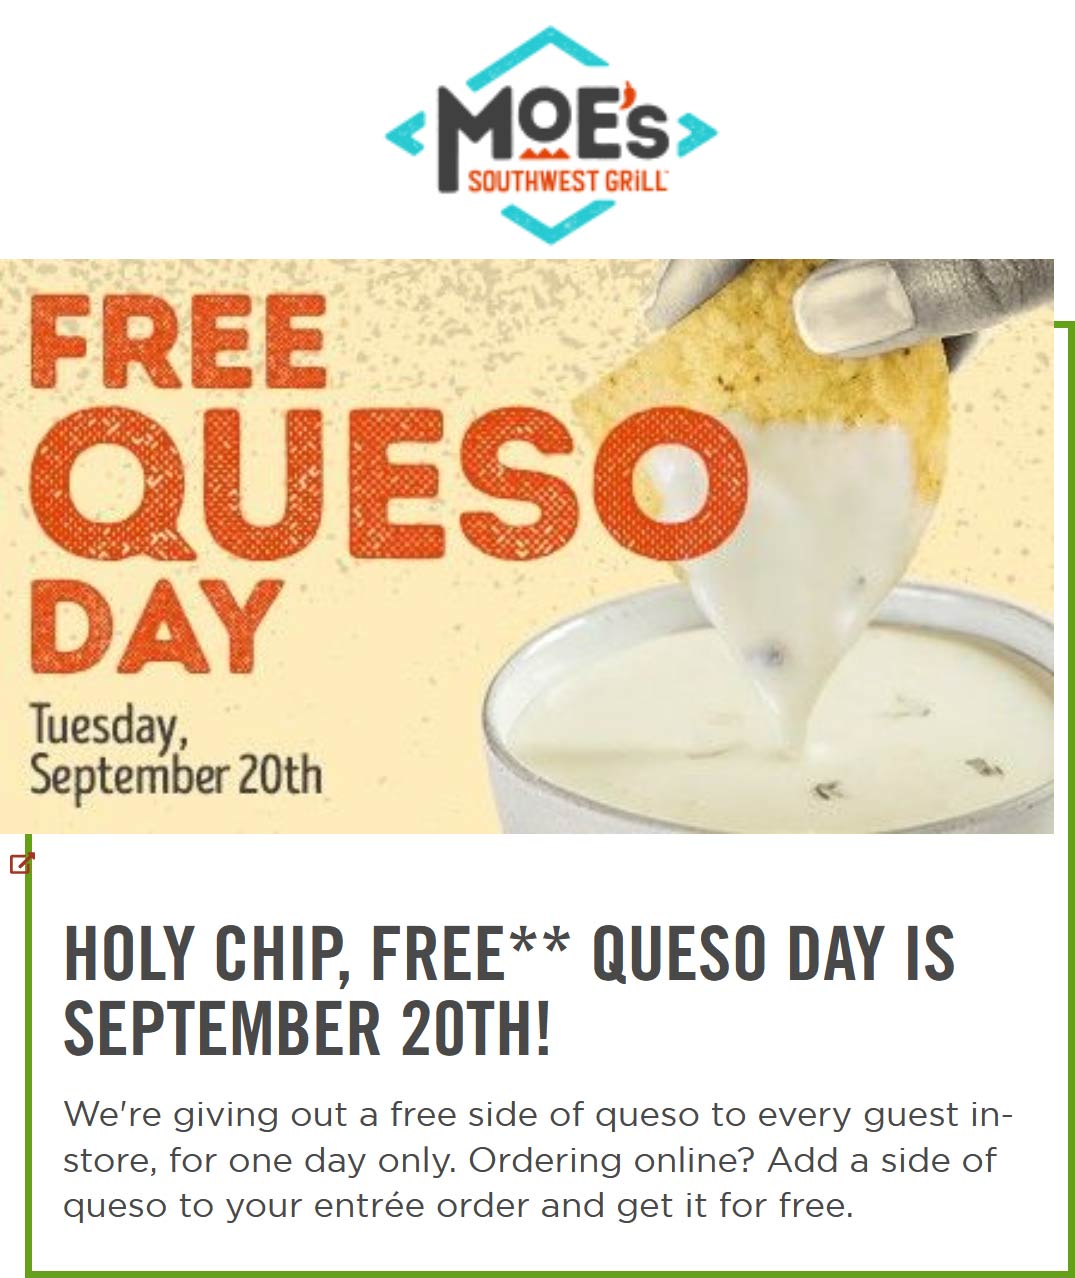 Moes Southwest Grill coupons & promo code for [November 2022]